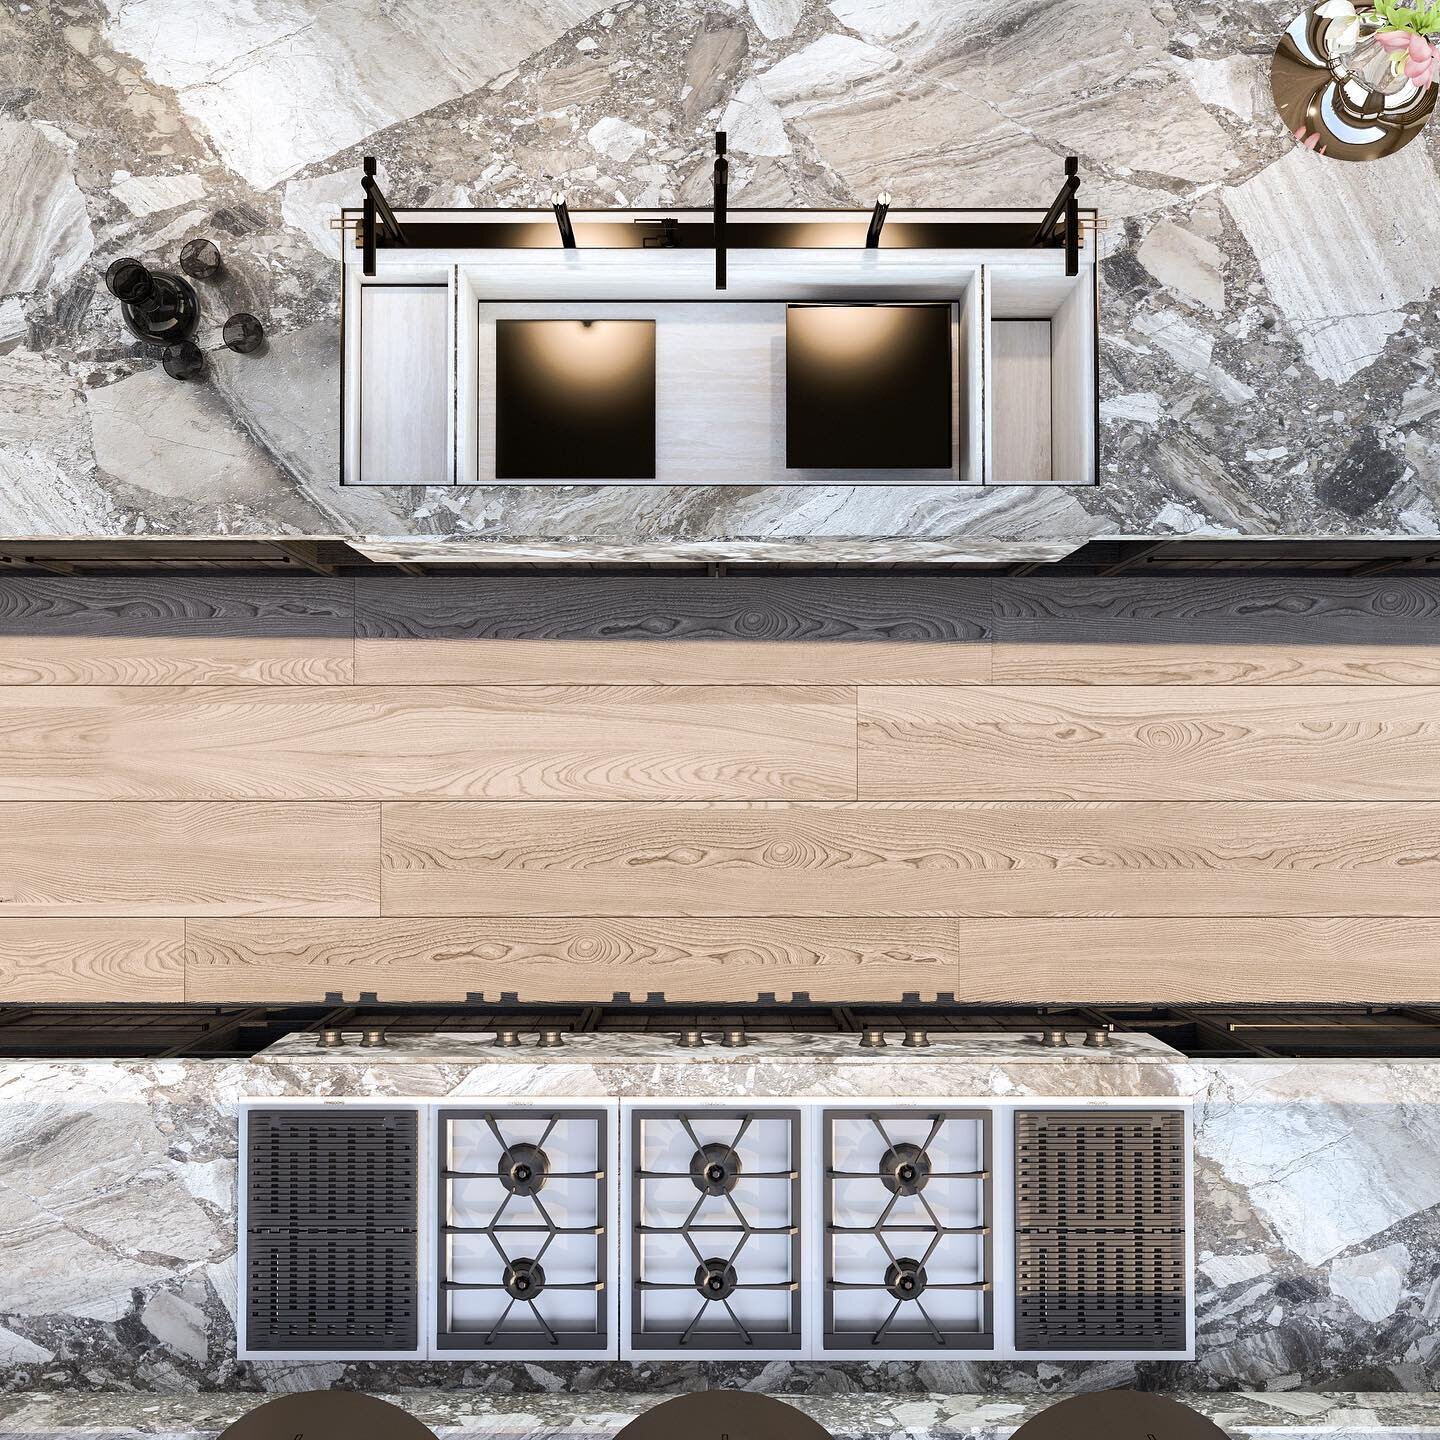 P1 - a bespoke kitchen somewhere in Hawai&rsquo;i 🏝 Custom Ivory Travertine, Positano Grey Marble and bronze metal sink with custom bronze faucet array &amp; accessories

&hellip;more to come&hellip;

#designbyjdm